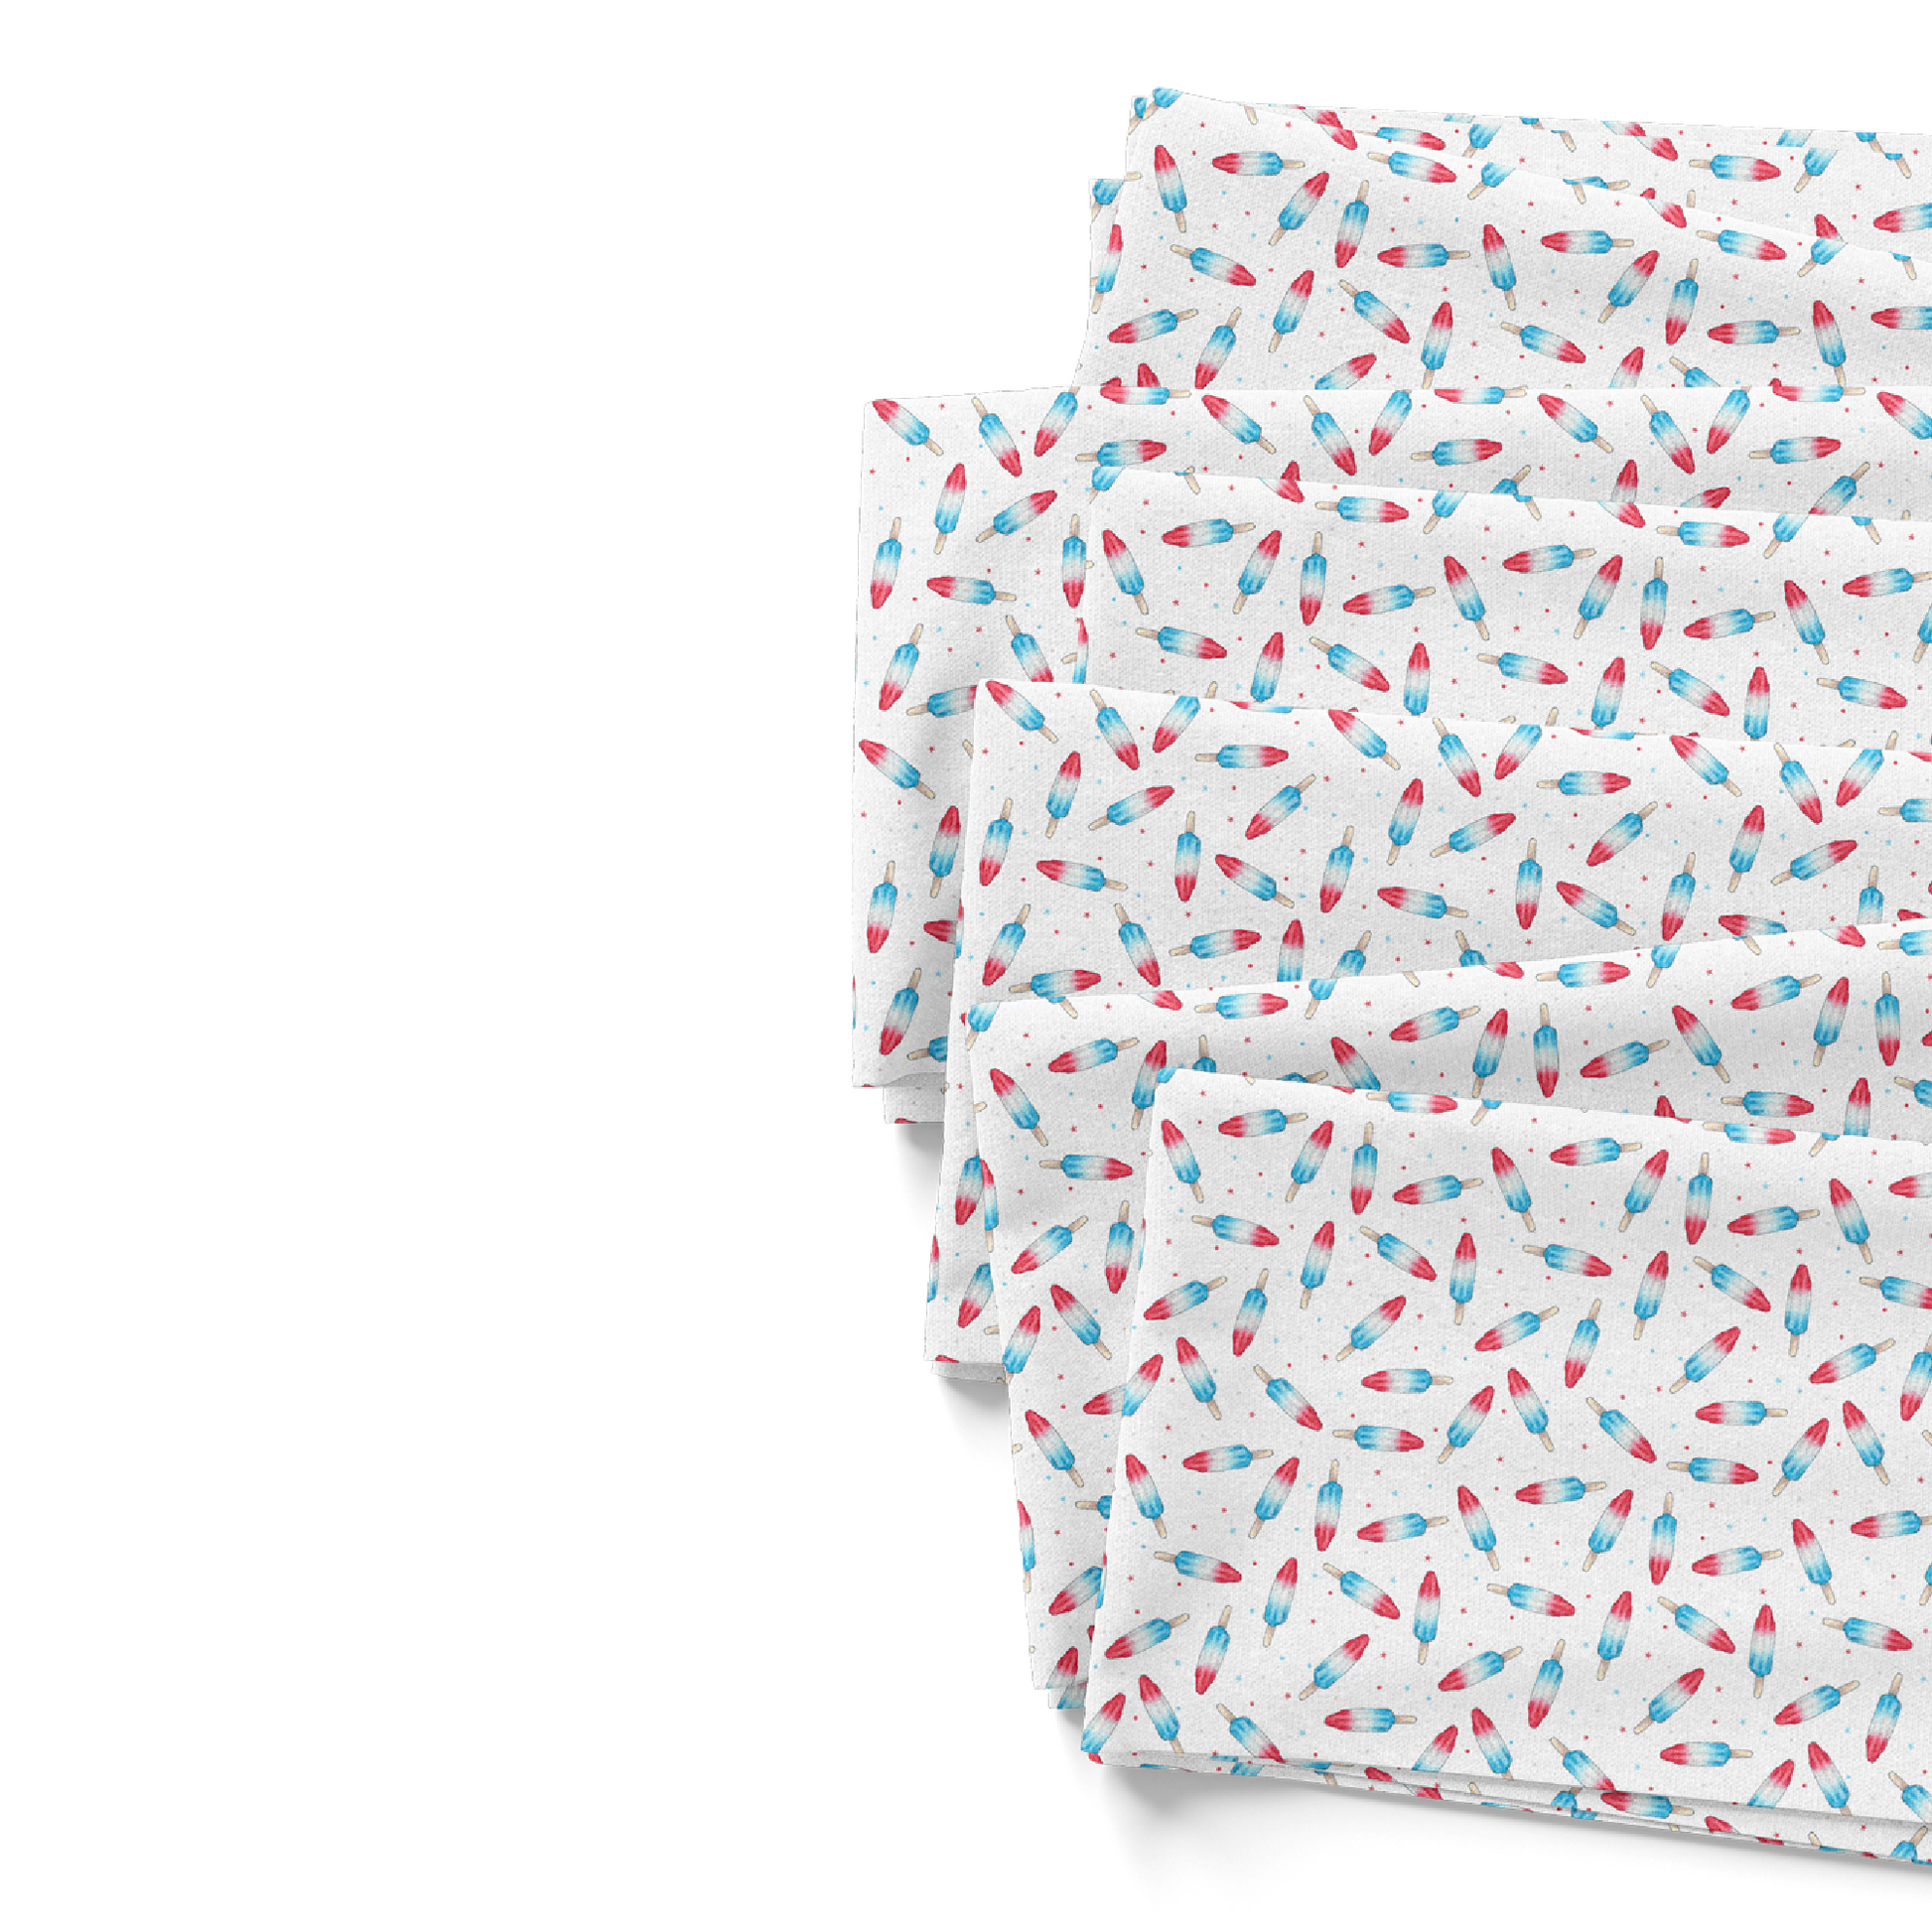 Bright Blue, White and Red Popsicle Fabric by the Yard -July 4th Rocket Pop 